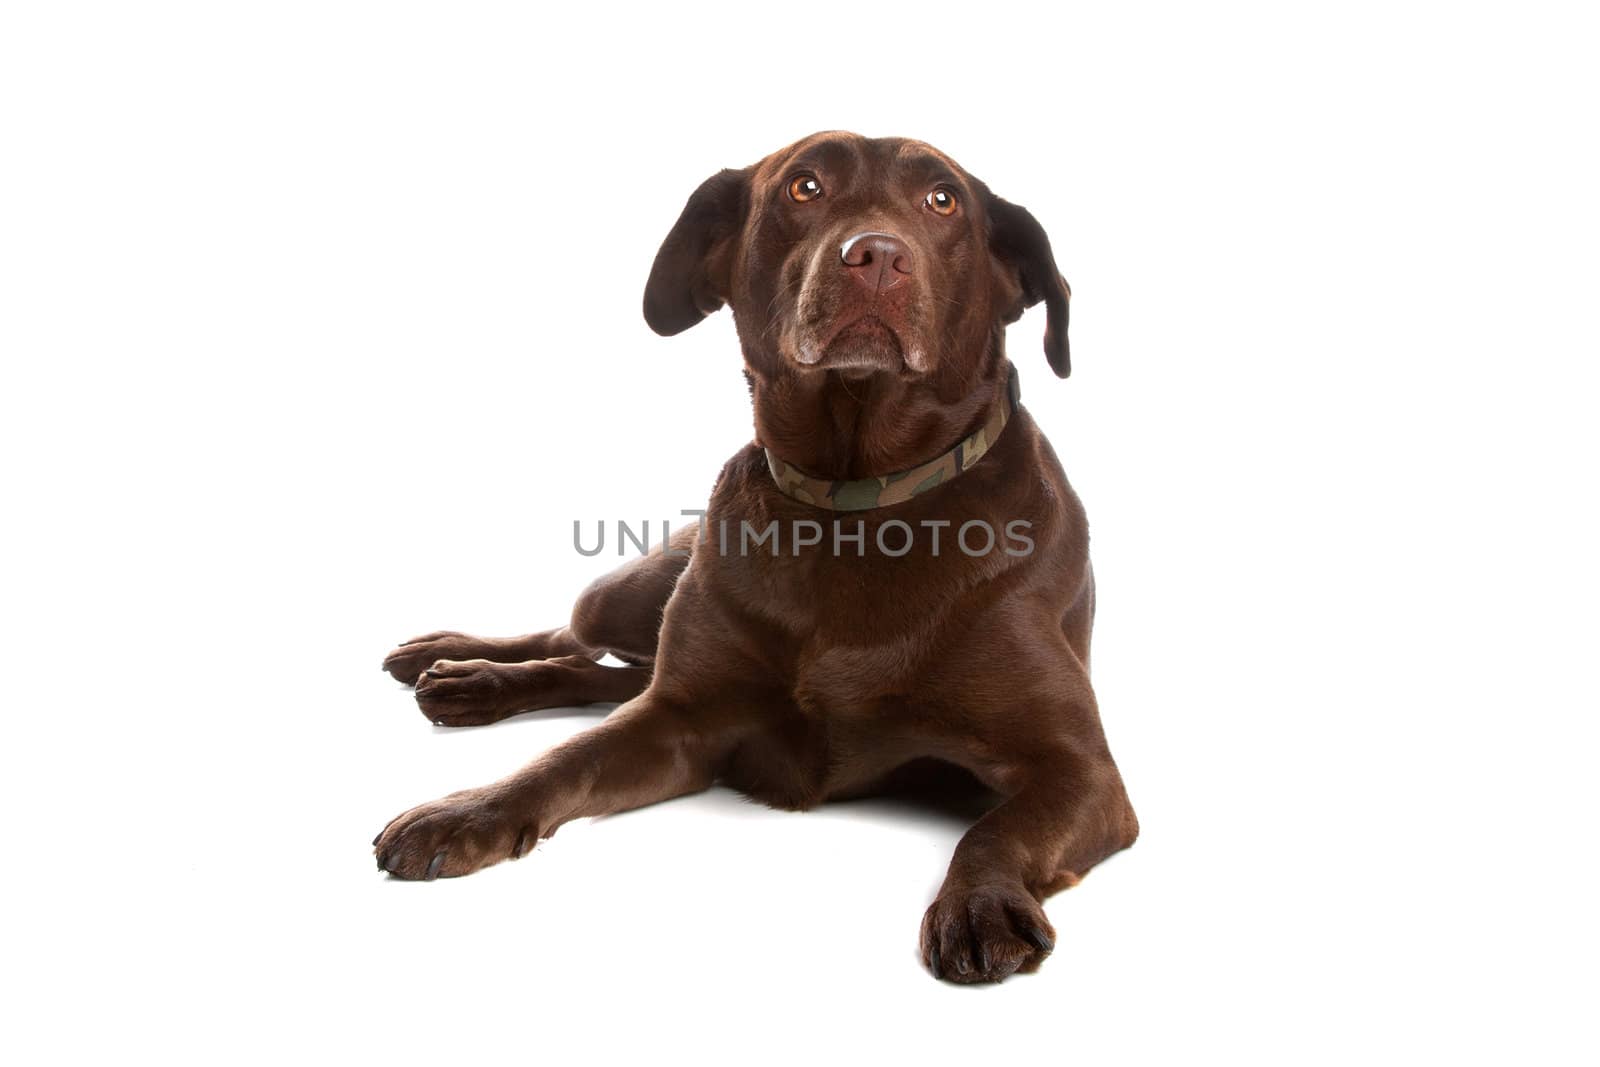 Chocolate labrador retriever dog lying and looking up, isolated on a white background.